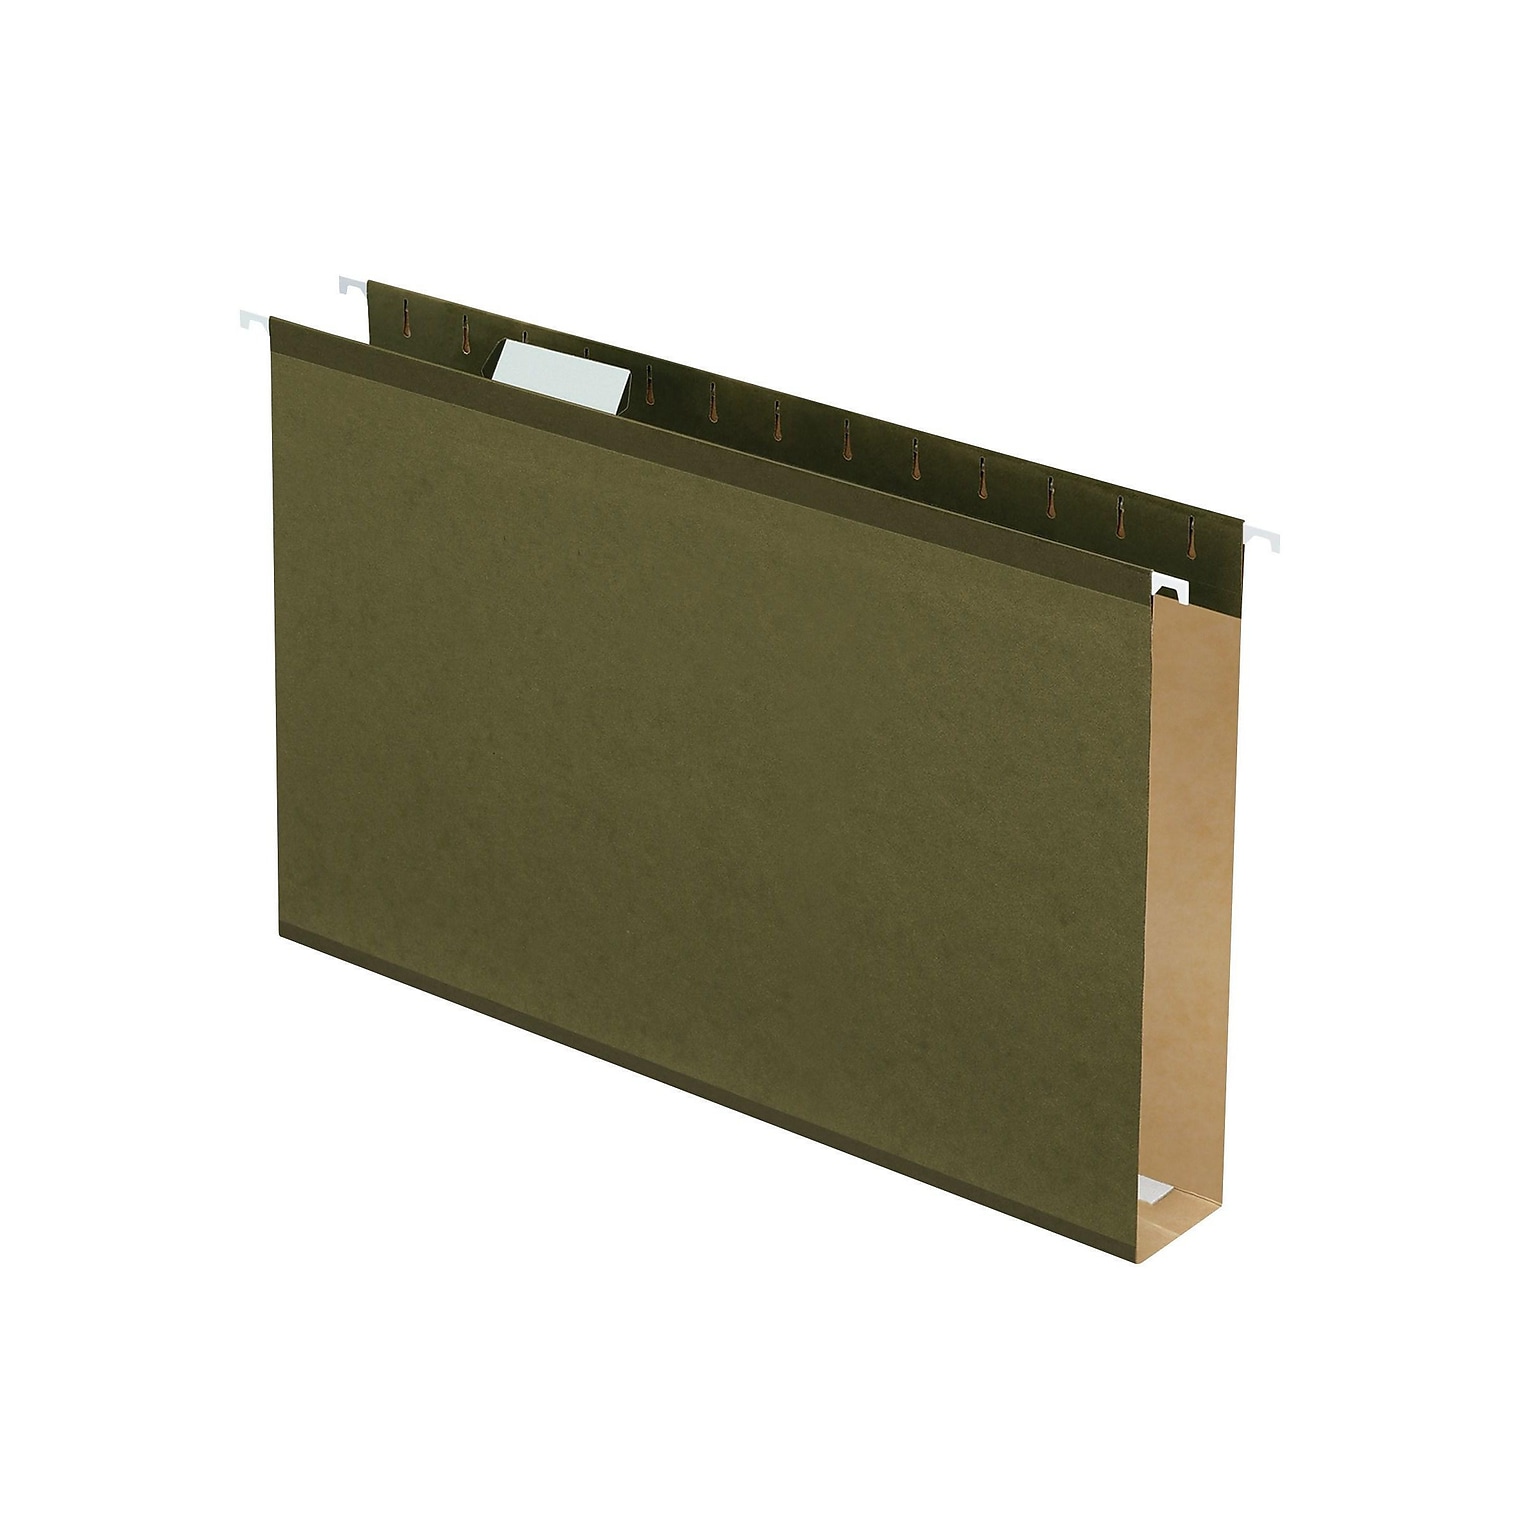 Pendaflex Reinforced Hanging File Folders, Extra Capacity, 5-Tab, Legal Size, 2 Expansion, Standard Green, 25/Box (PFX 04153x2)